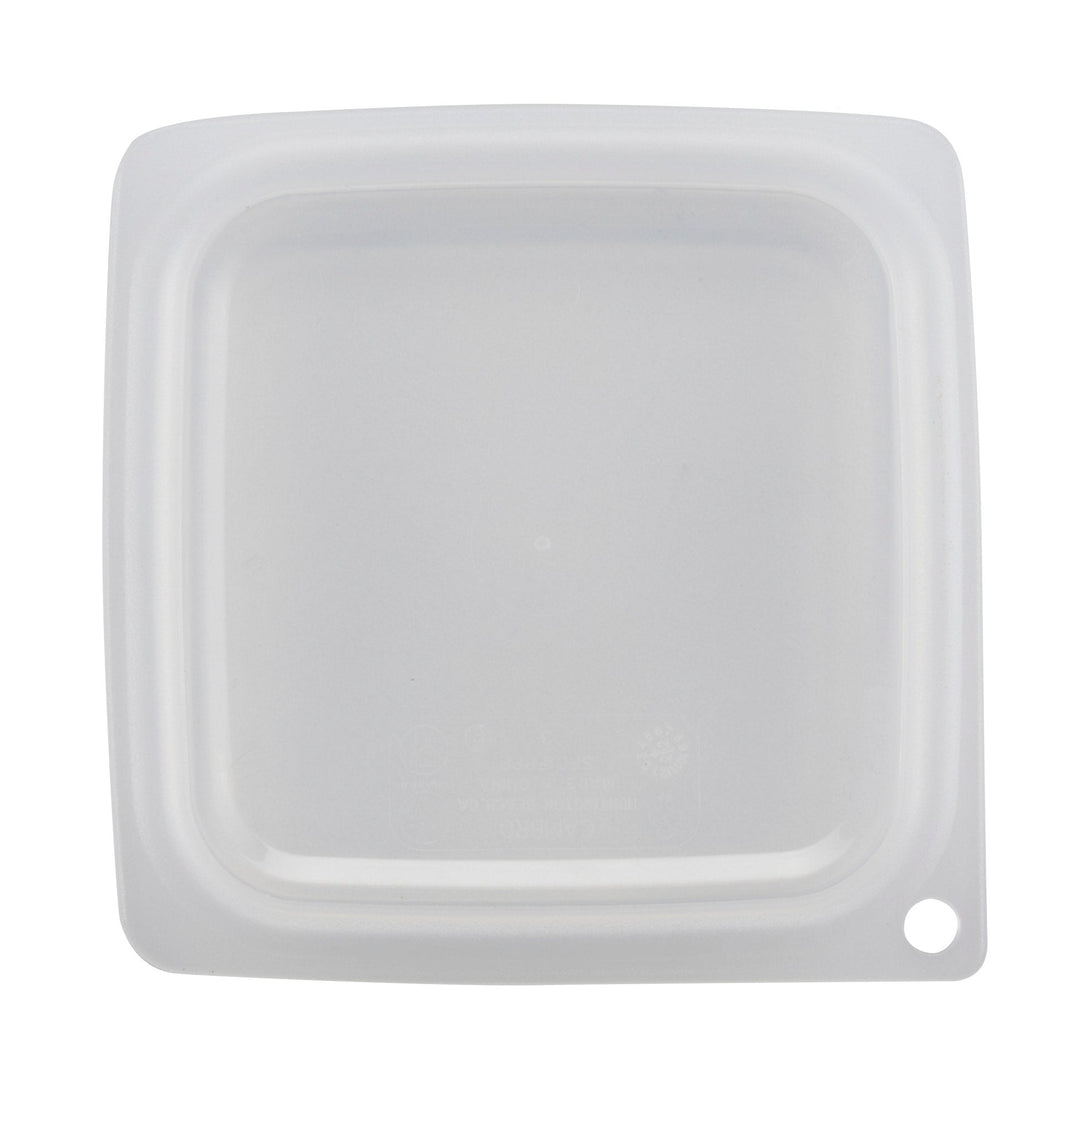 Cambro SFC1FPPP Square Translucent Seal Cover for 1/2 and 1 qt Food Containers